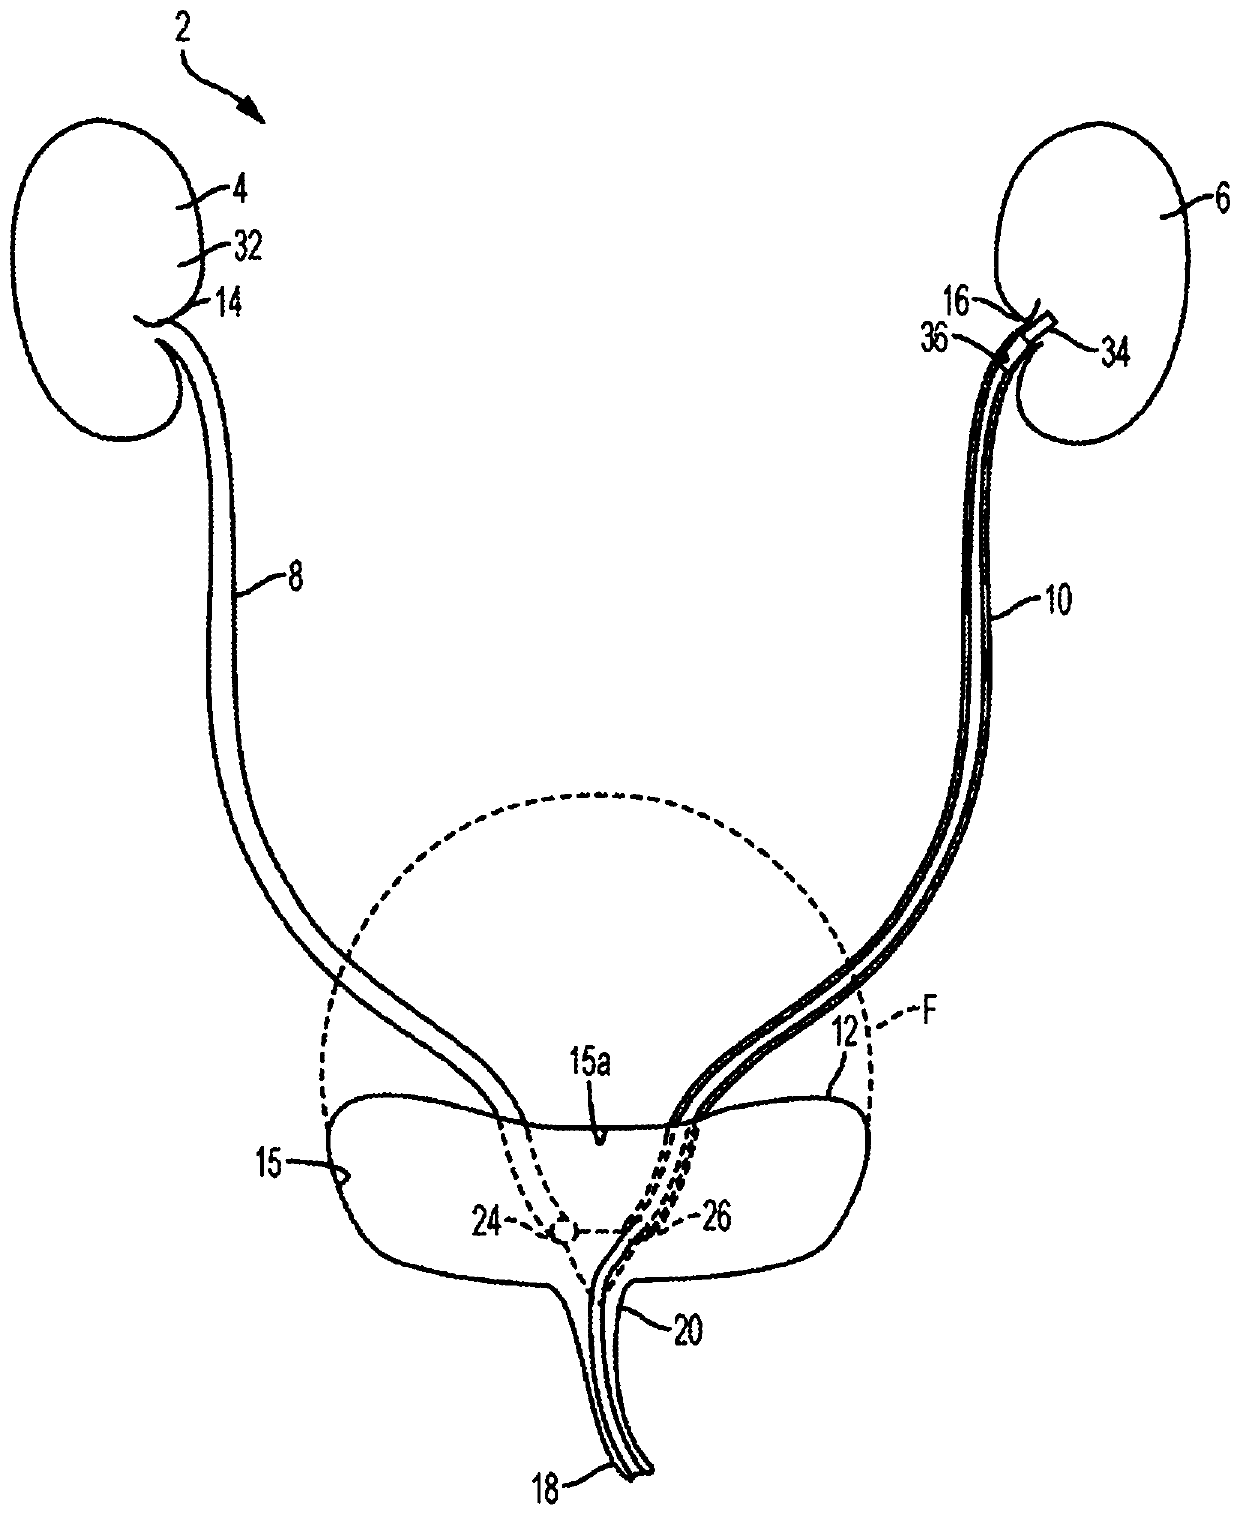 Indwelling pump for facilitating removal of urine from the urinary tract